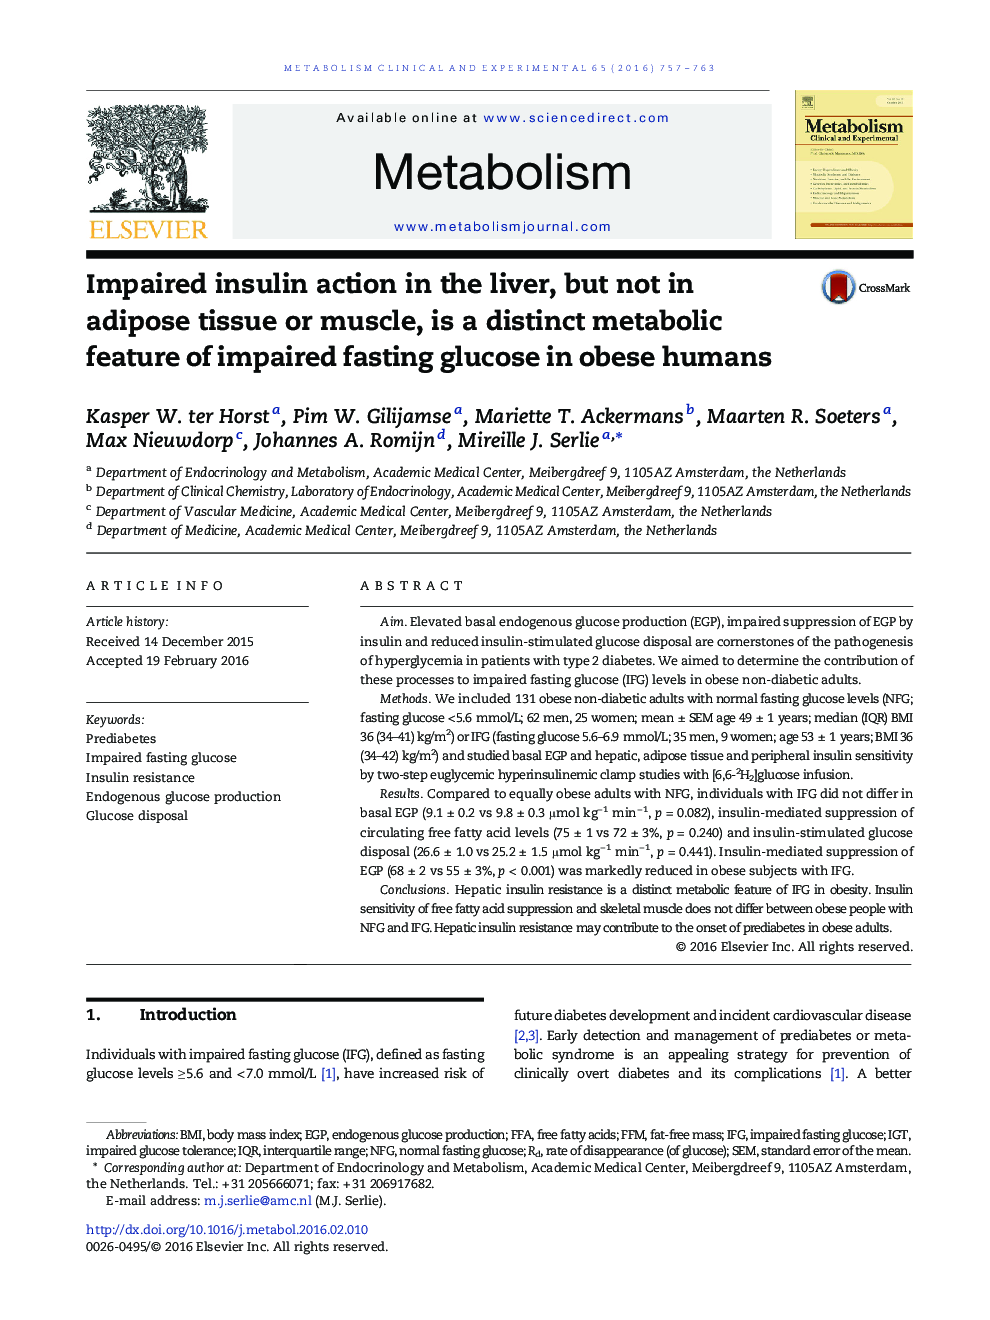 Impaired insulin action in the liver, but not in adipose tissue or muscle, is a distinct metabolic feature of impaired fasting glucose in obese humans